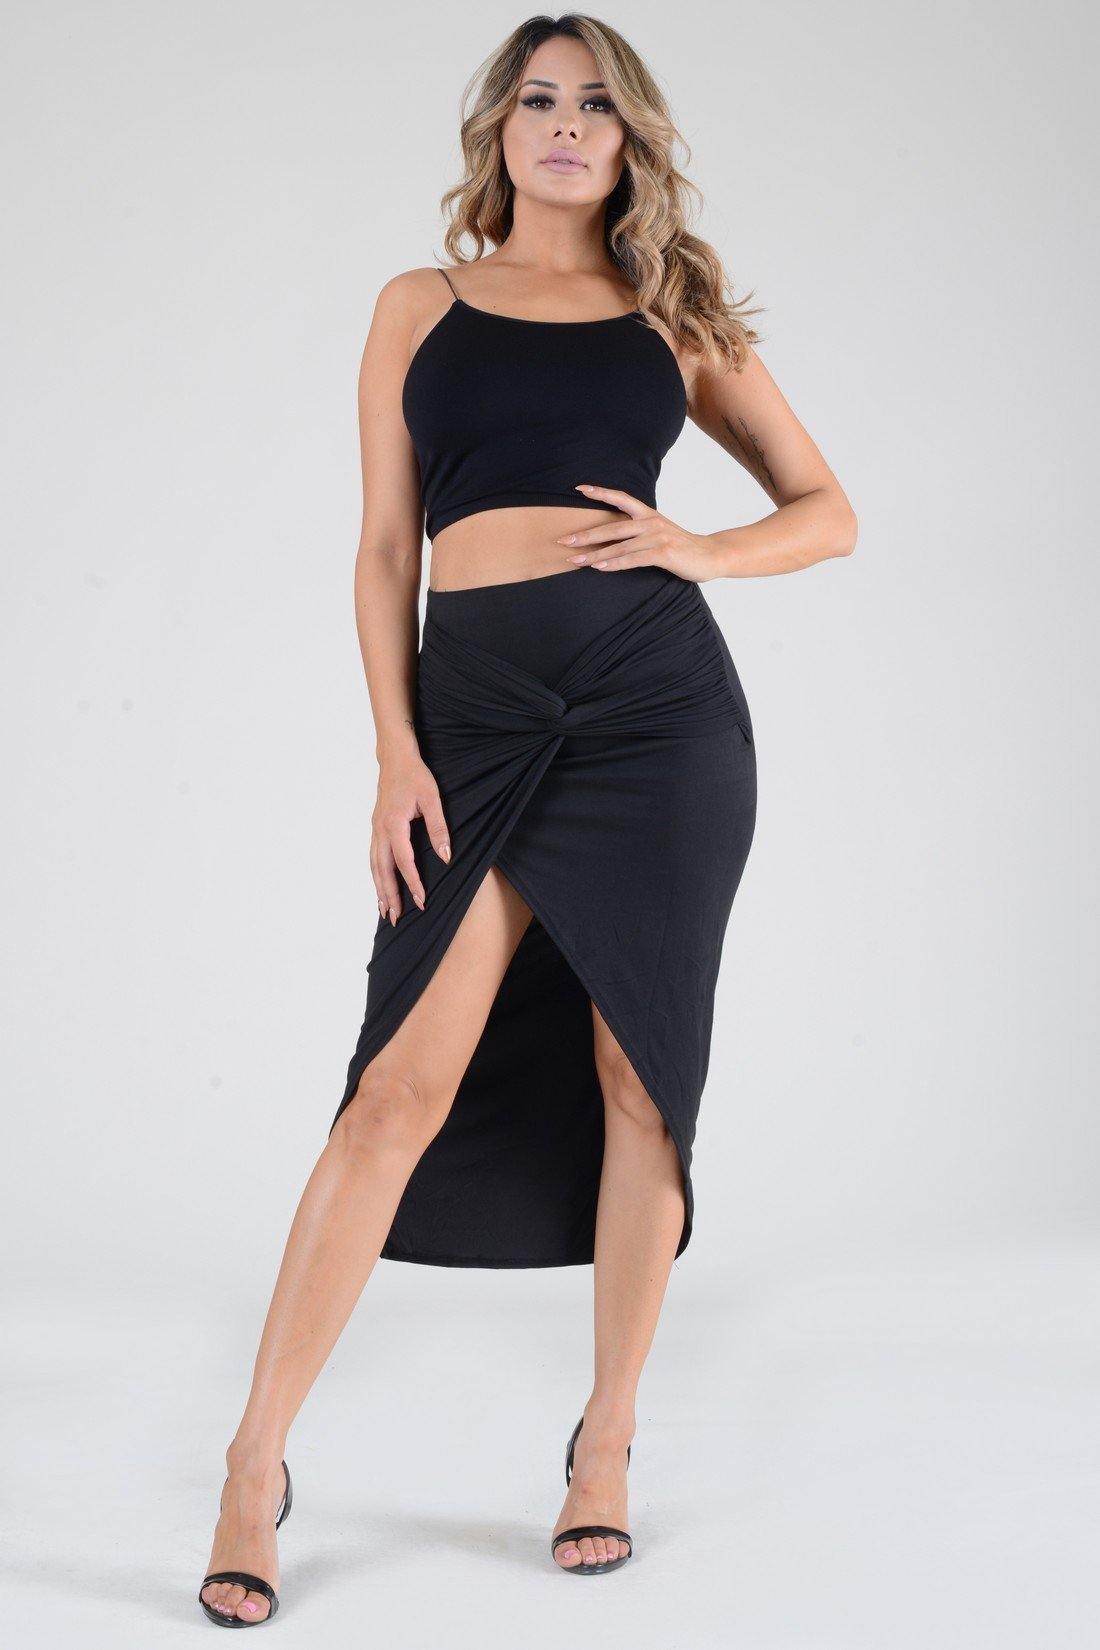 Black slit knot skirt - Anchored Feather Boutique